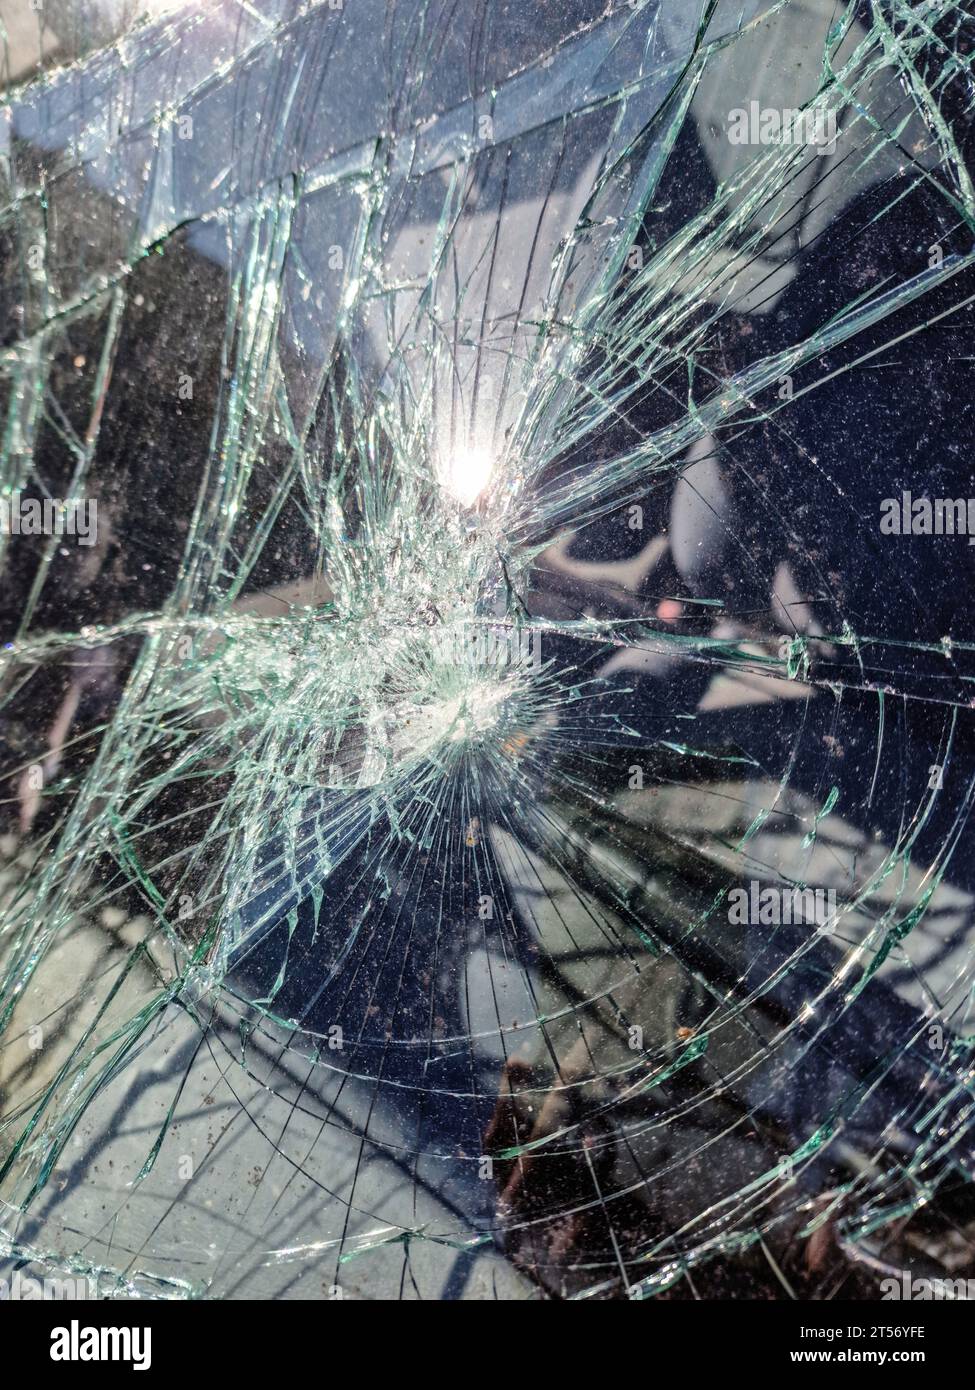 Broken Car Windscreen Or Windshield Window. Smashed Front Glass Stock Photo